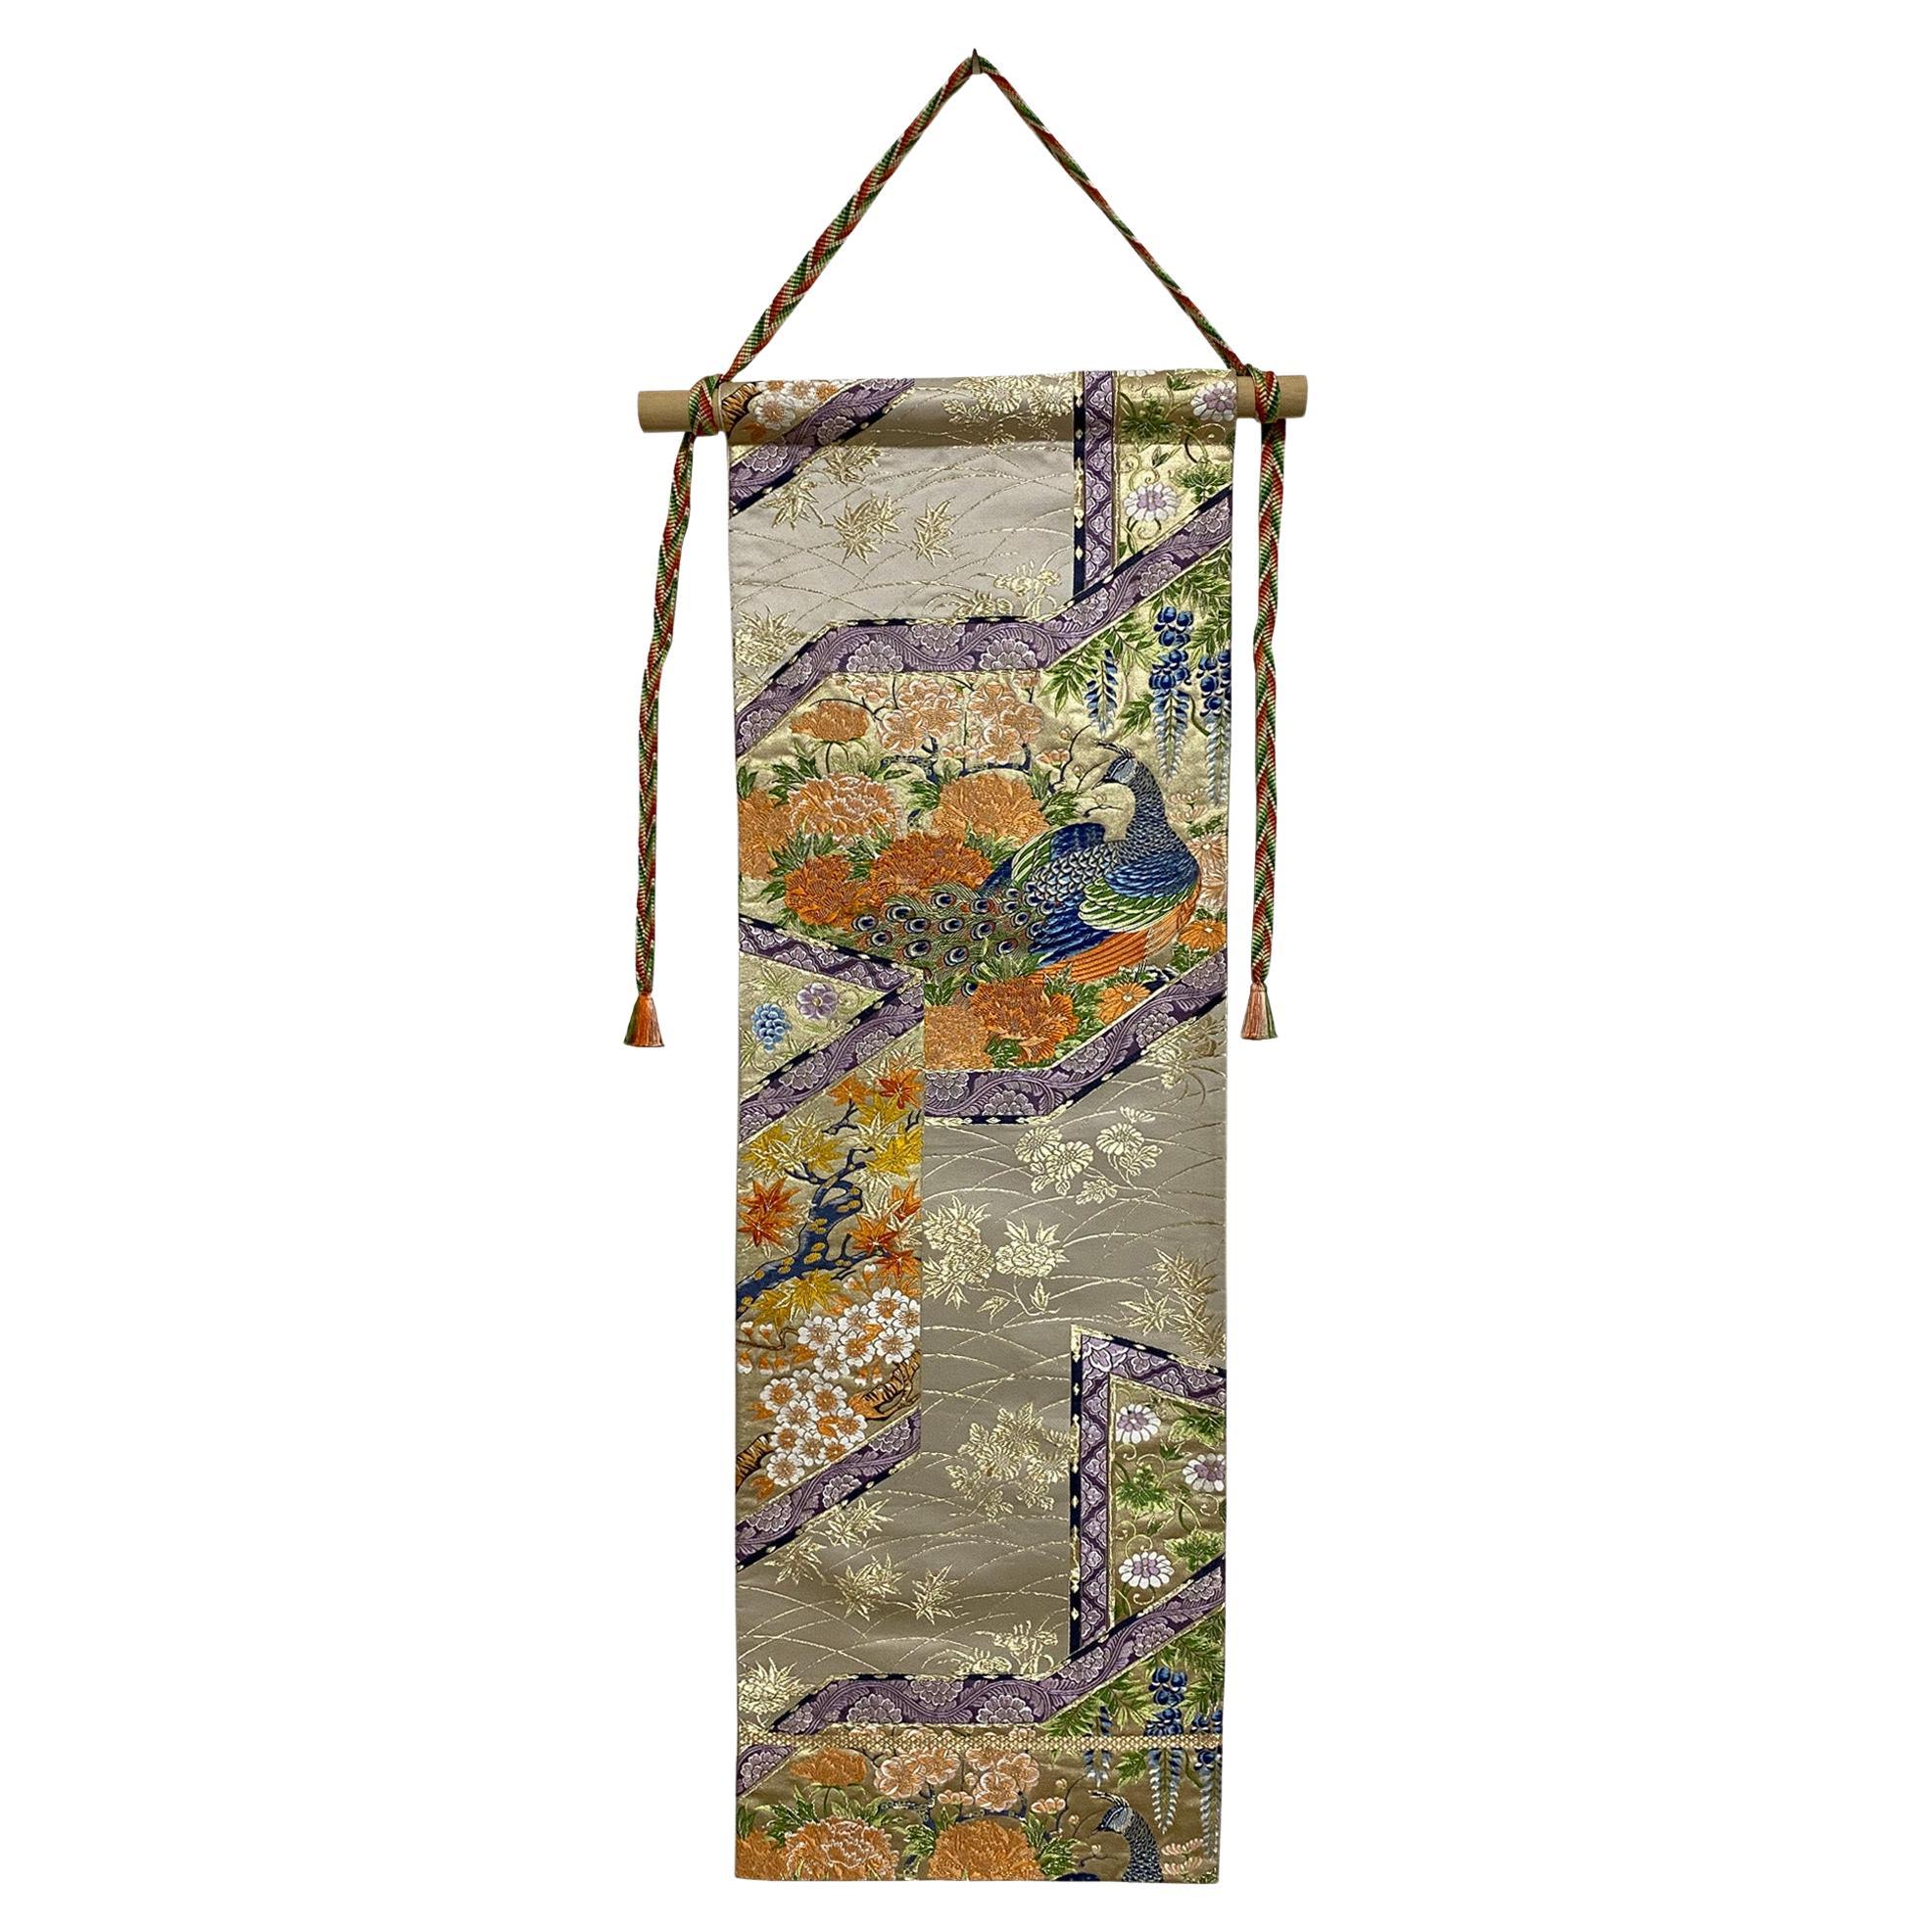 Kimono Tapestry “The King of Peacocks” , Japanese Art, Japanese Hanging Scroll For Sale